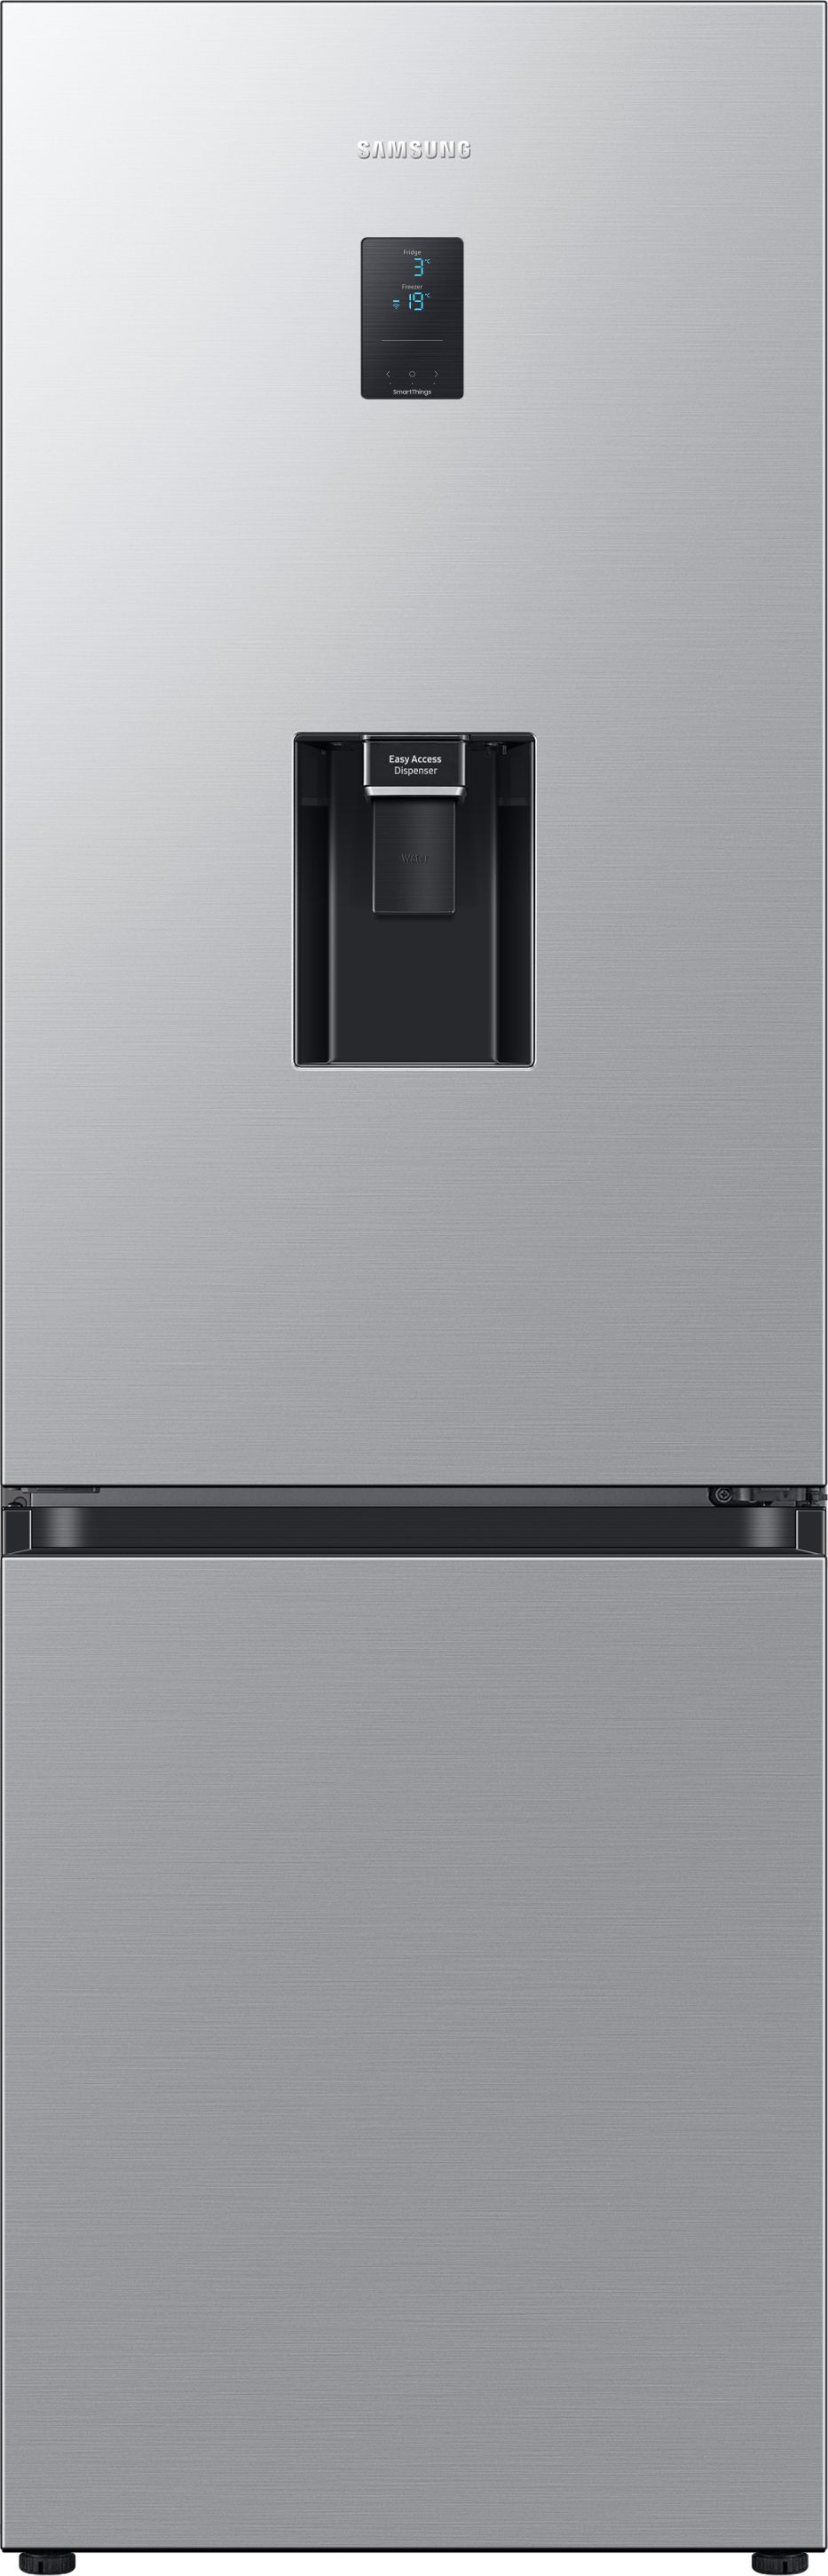 Samsung Series 4 RB34C652ESA Wifi Connected 60/40 No Frost Fridge Freezer - Silver - E Rated, Silver